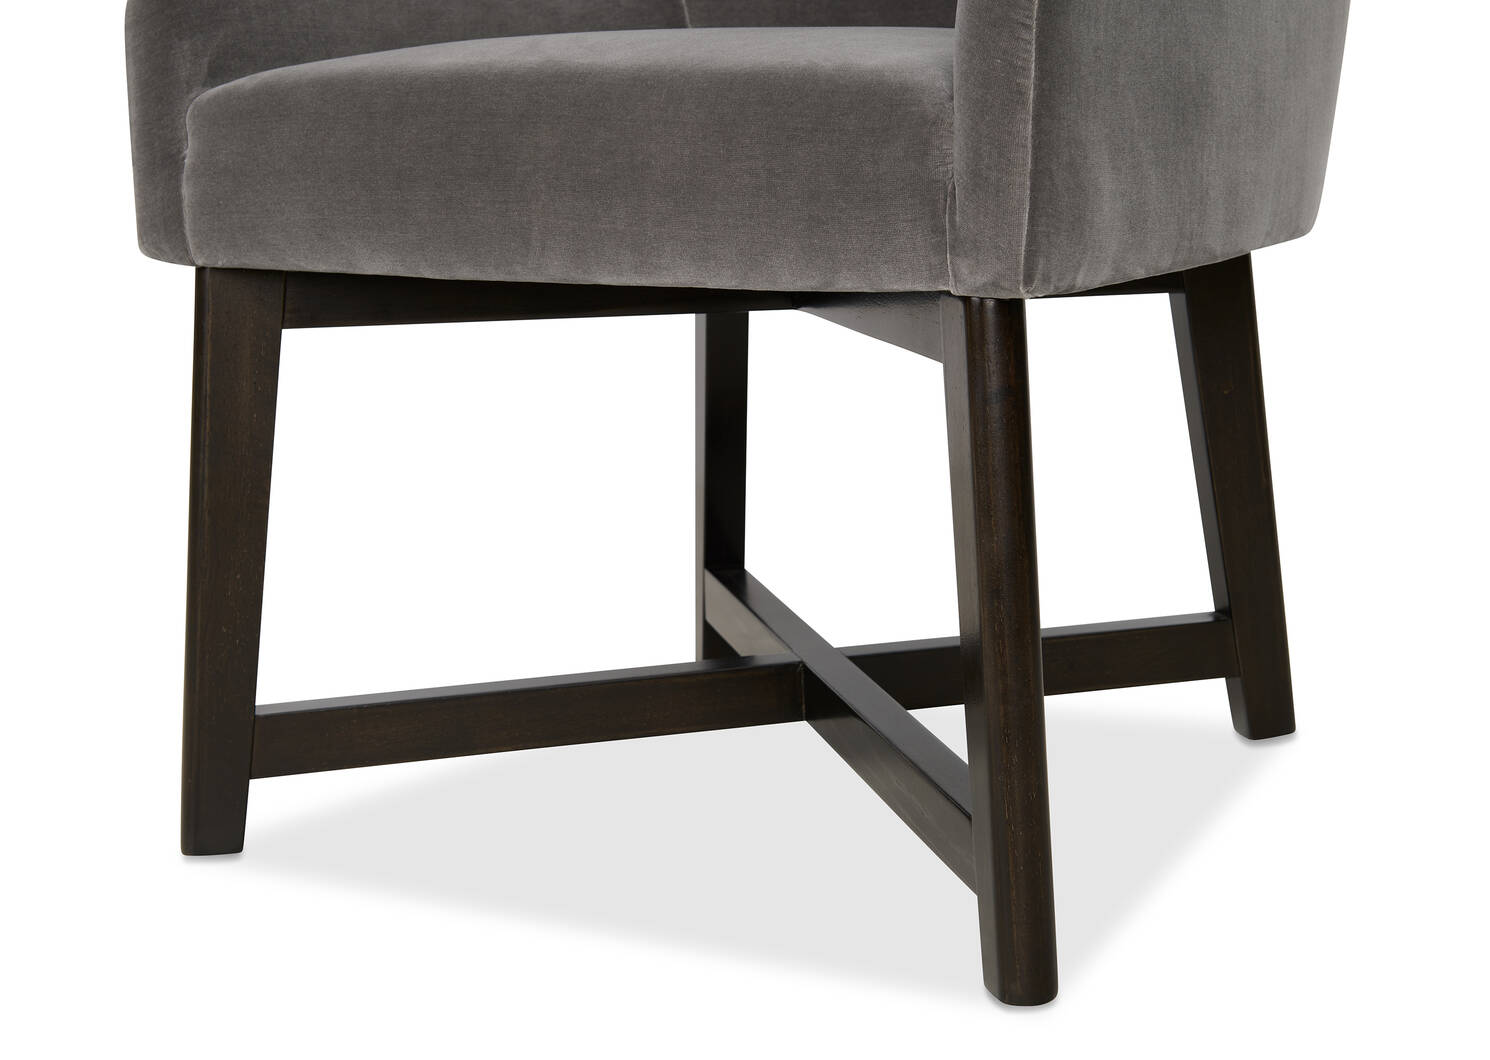 Turcotte Dining Chair -Eaton Mink